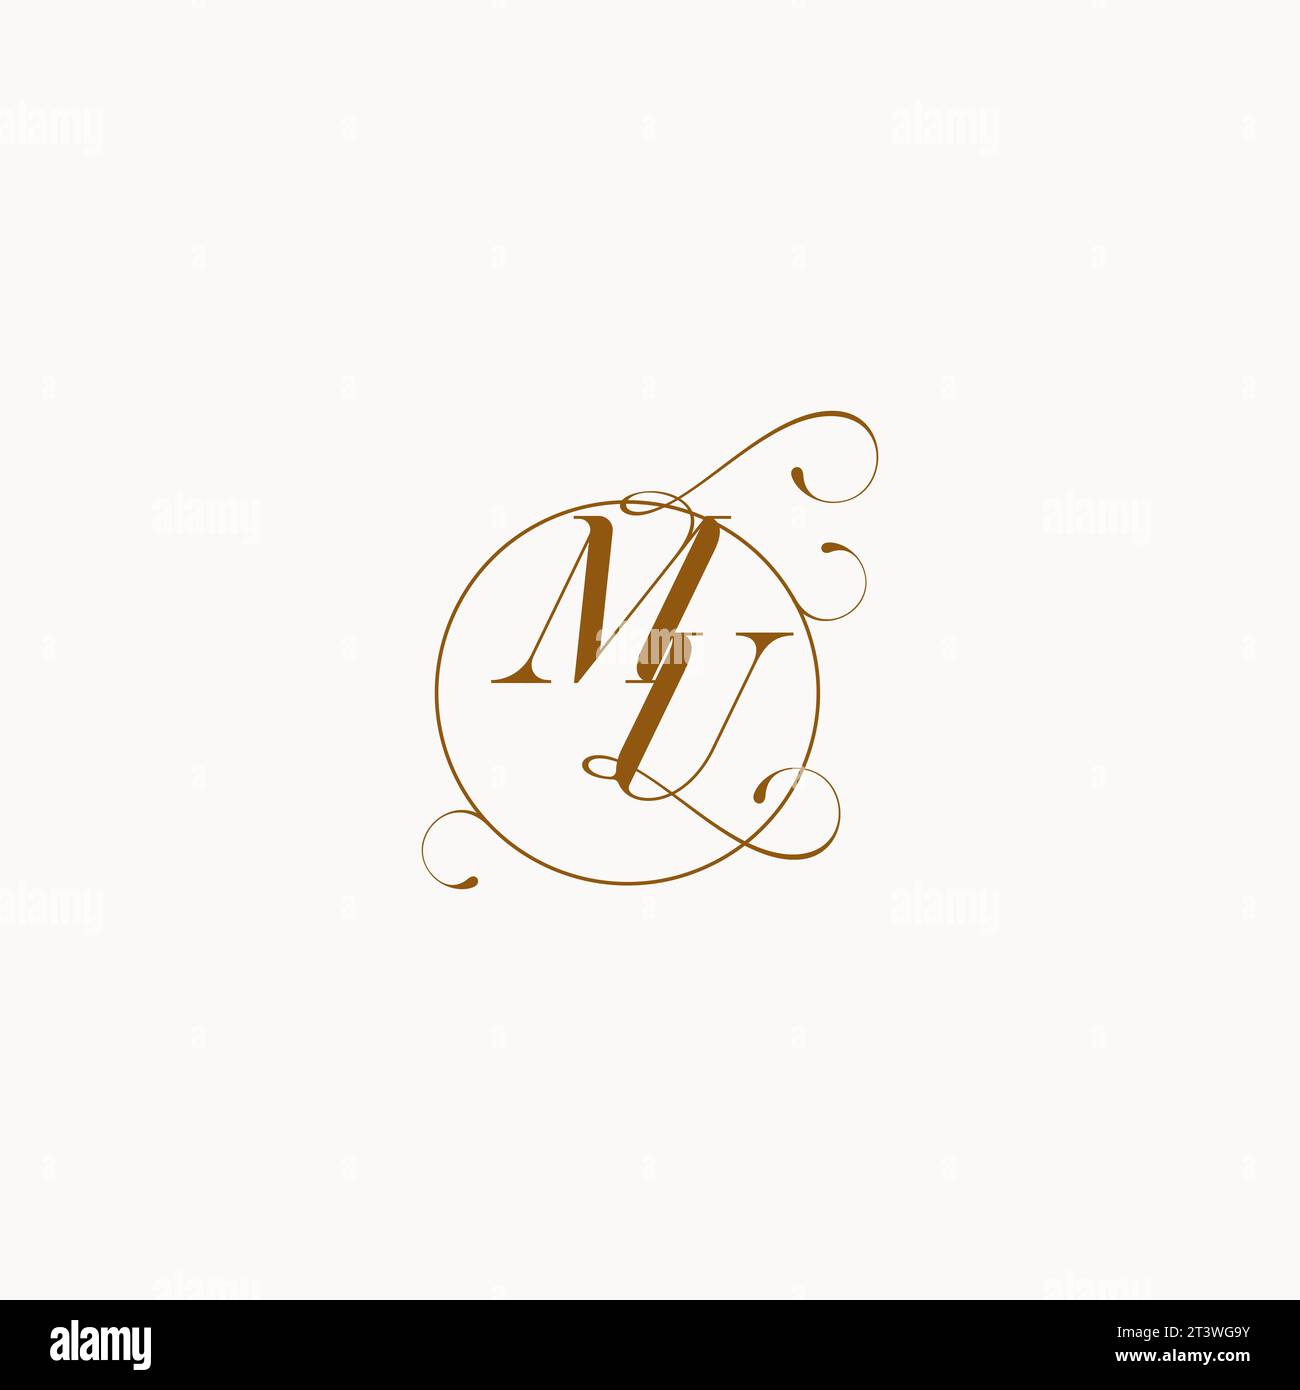 MU uniquely wedding logo symbol of your marriage and you can use it on your wedding stationary Stock Vector